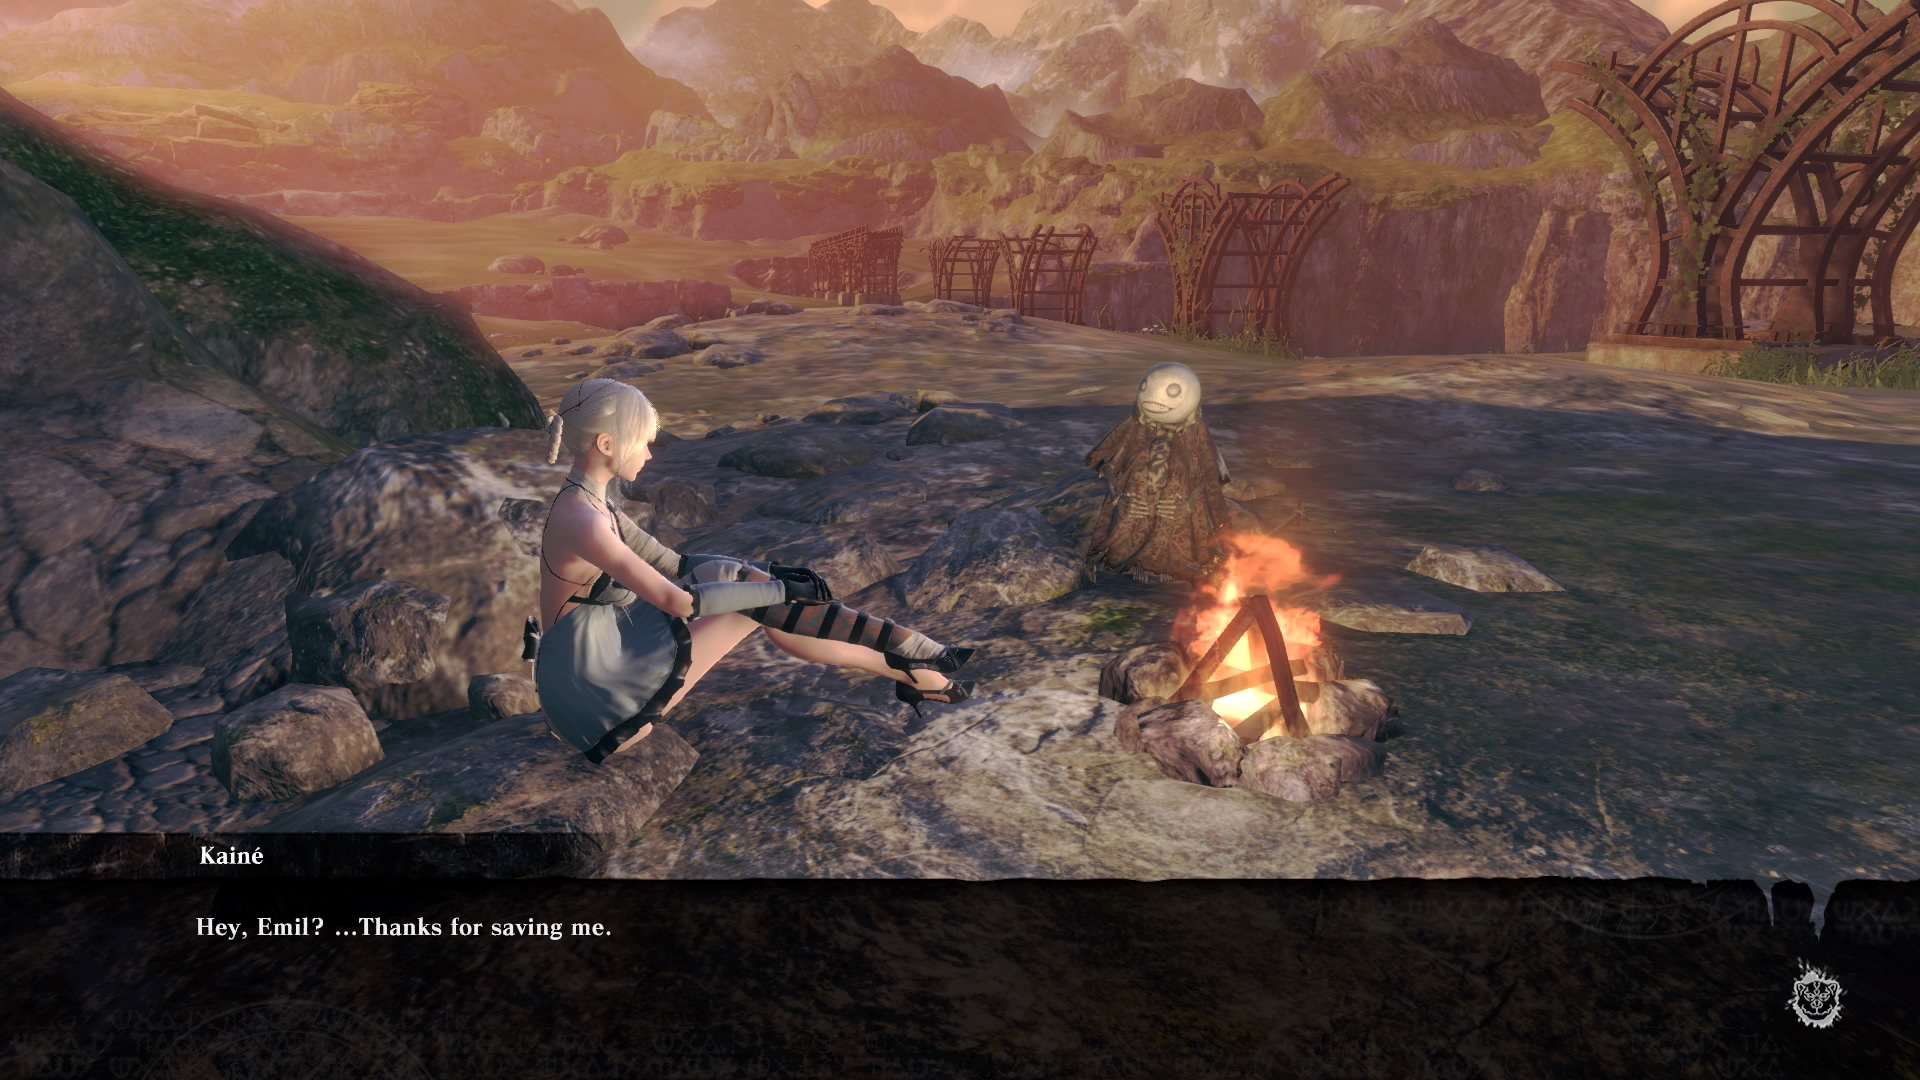 Kaine and Emil sitting next to a fire. Kaine is thanking Emil for saving her